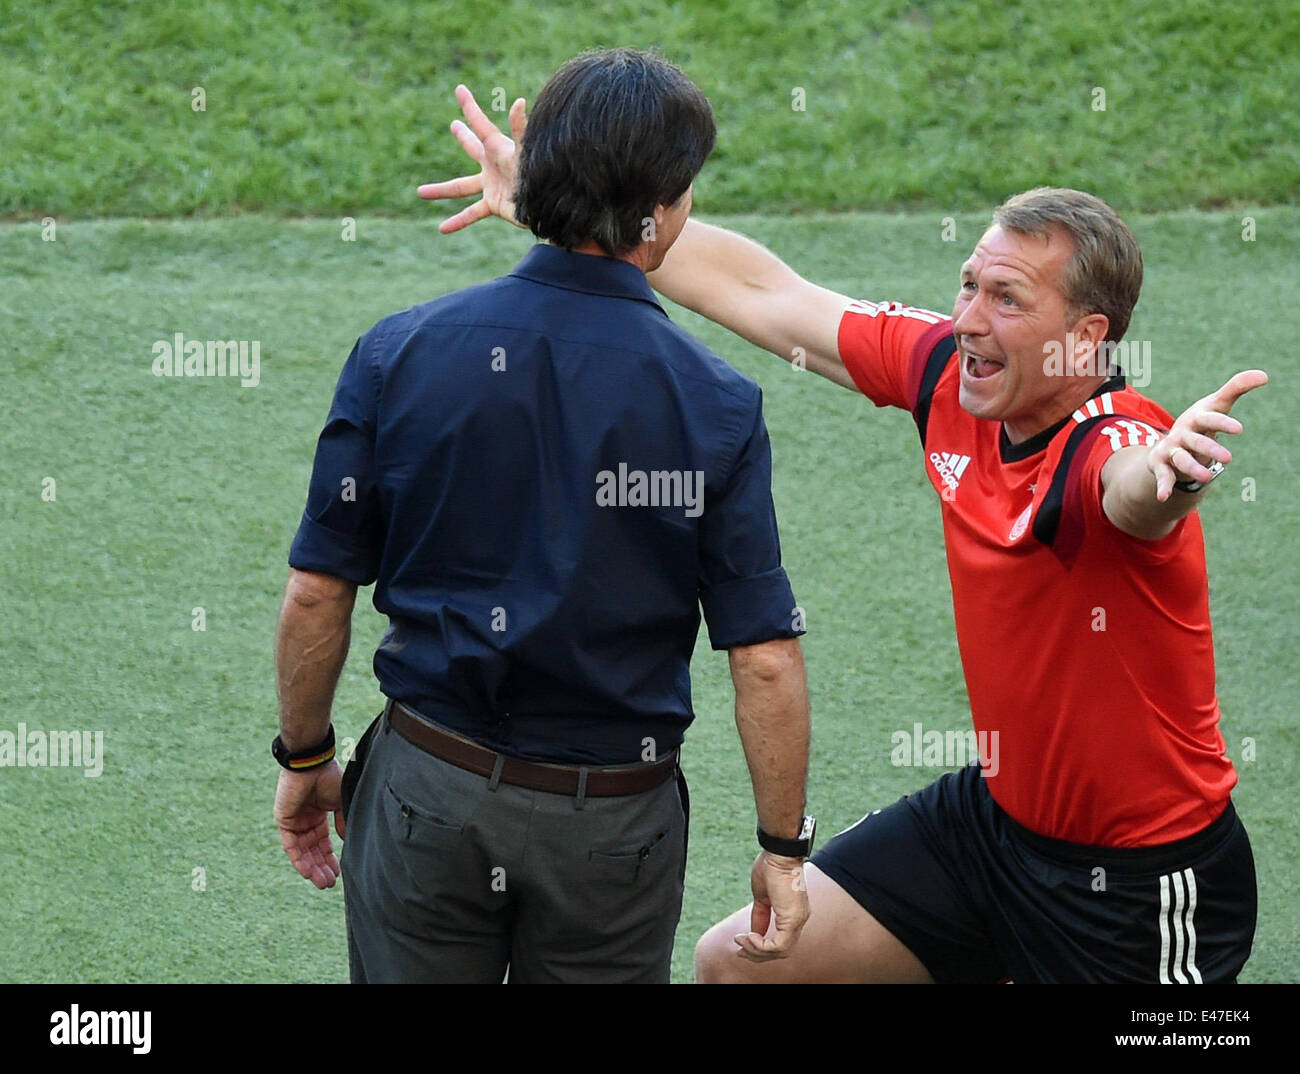 Rio de Janeiro, Brazil. 04th July, 2014. Head coach Joachim Loew (L) of Germany and goalkeeper coach Andreas Koepke celebrate during the FIFA World Cup 2014 quarter final soccer match between France and Germany at Estadio do Maracana in Rio de Janeiro, Brazil, 04 July 2014. Photo: Marcus Brandt/dpa/Alamy Live News Stock Photo